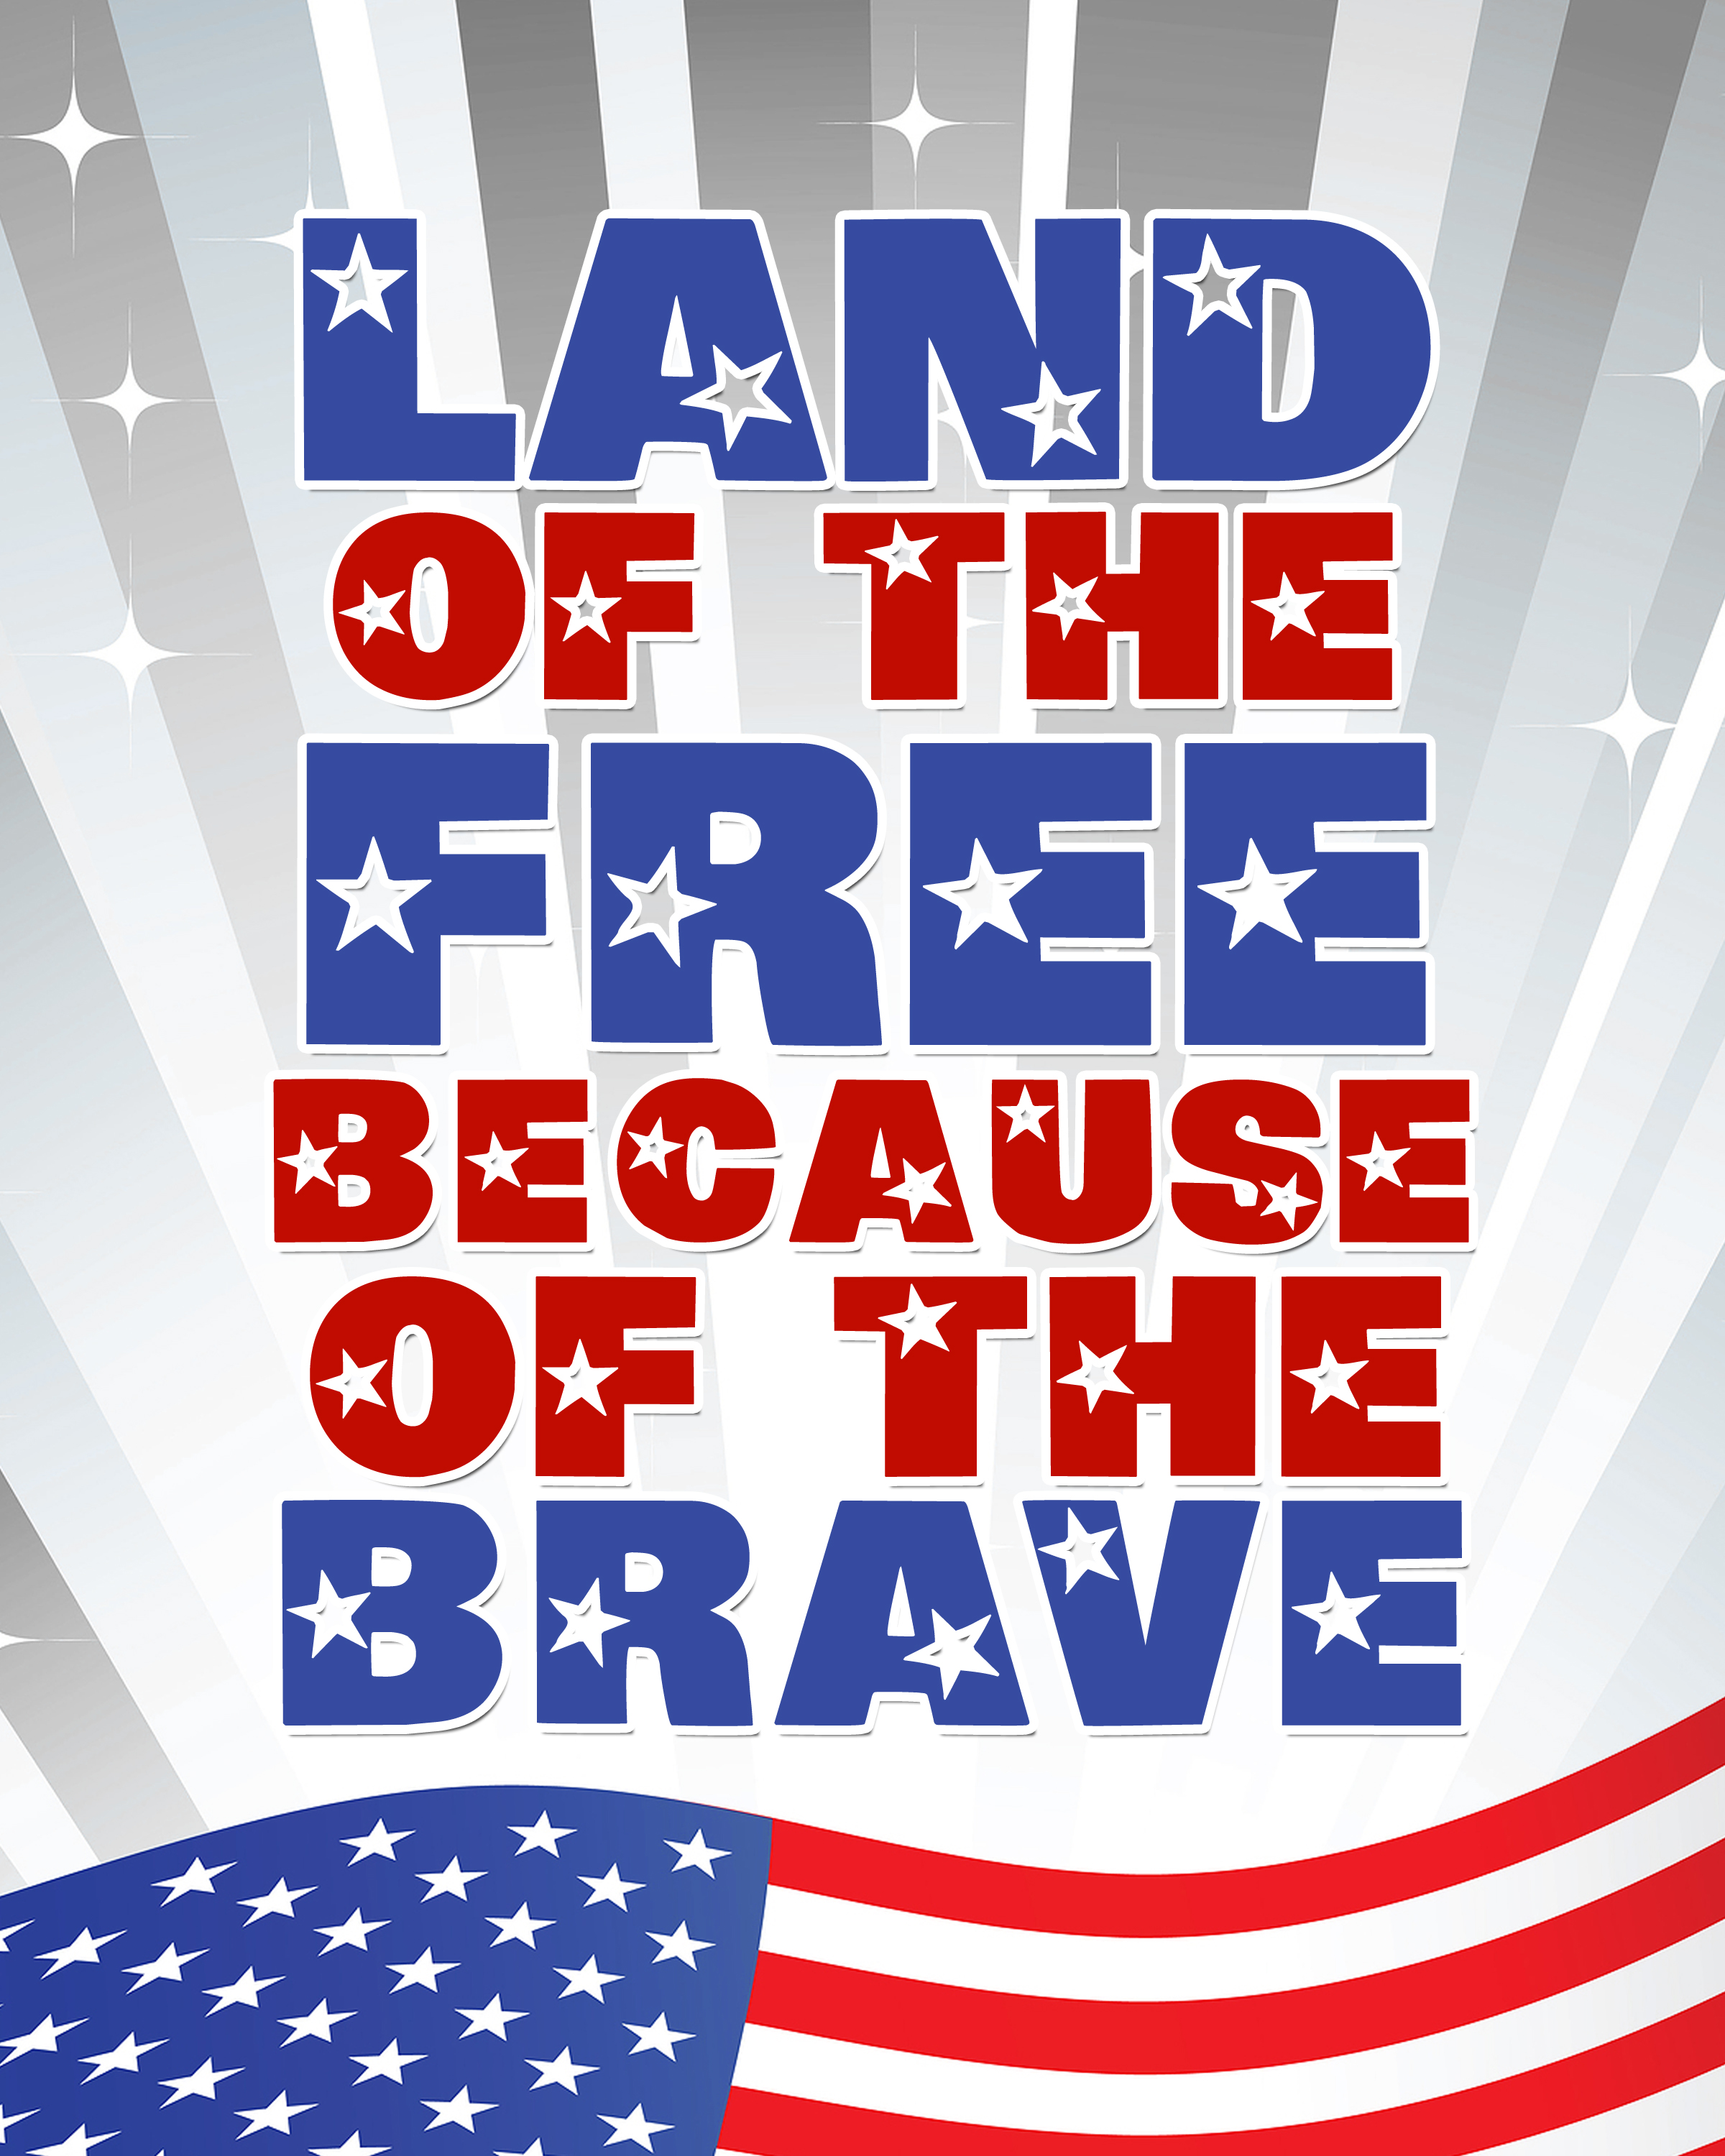 Happy Memorial Day Image Pictures Photos With Quotes To